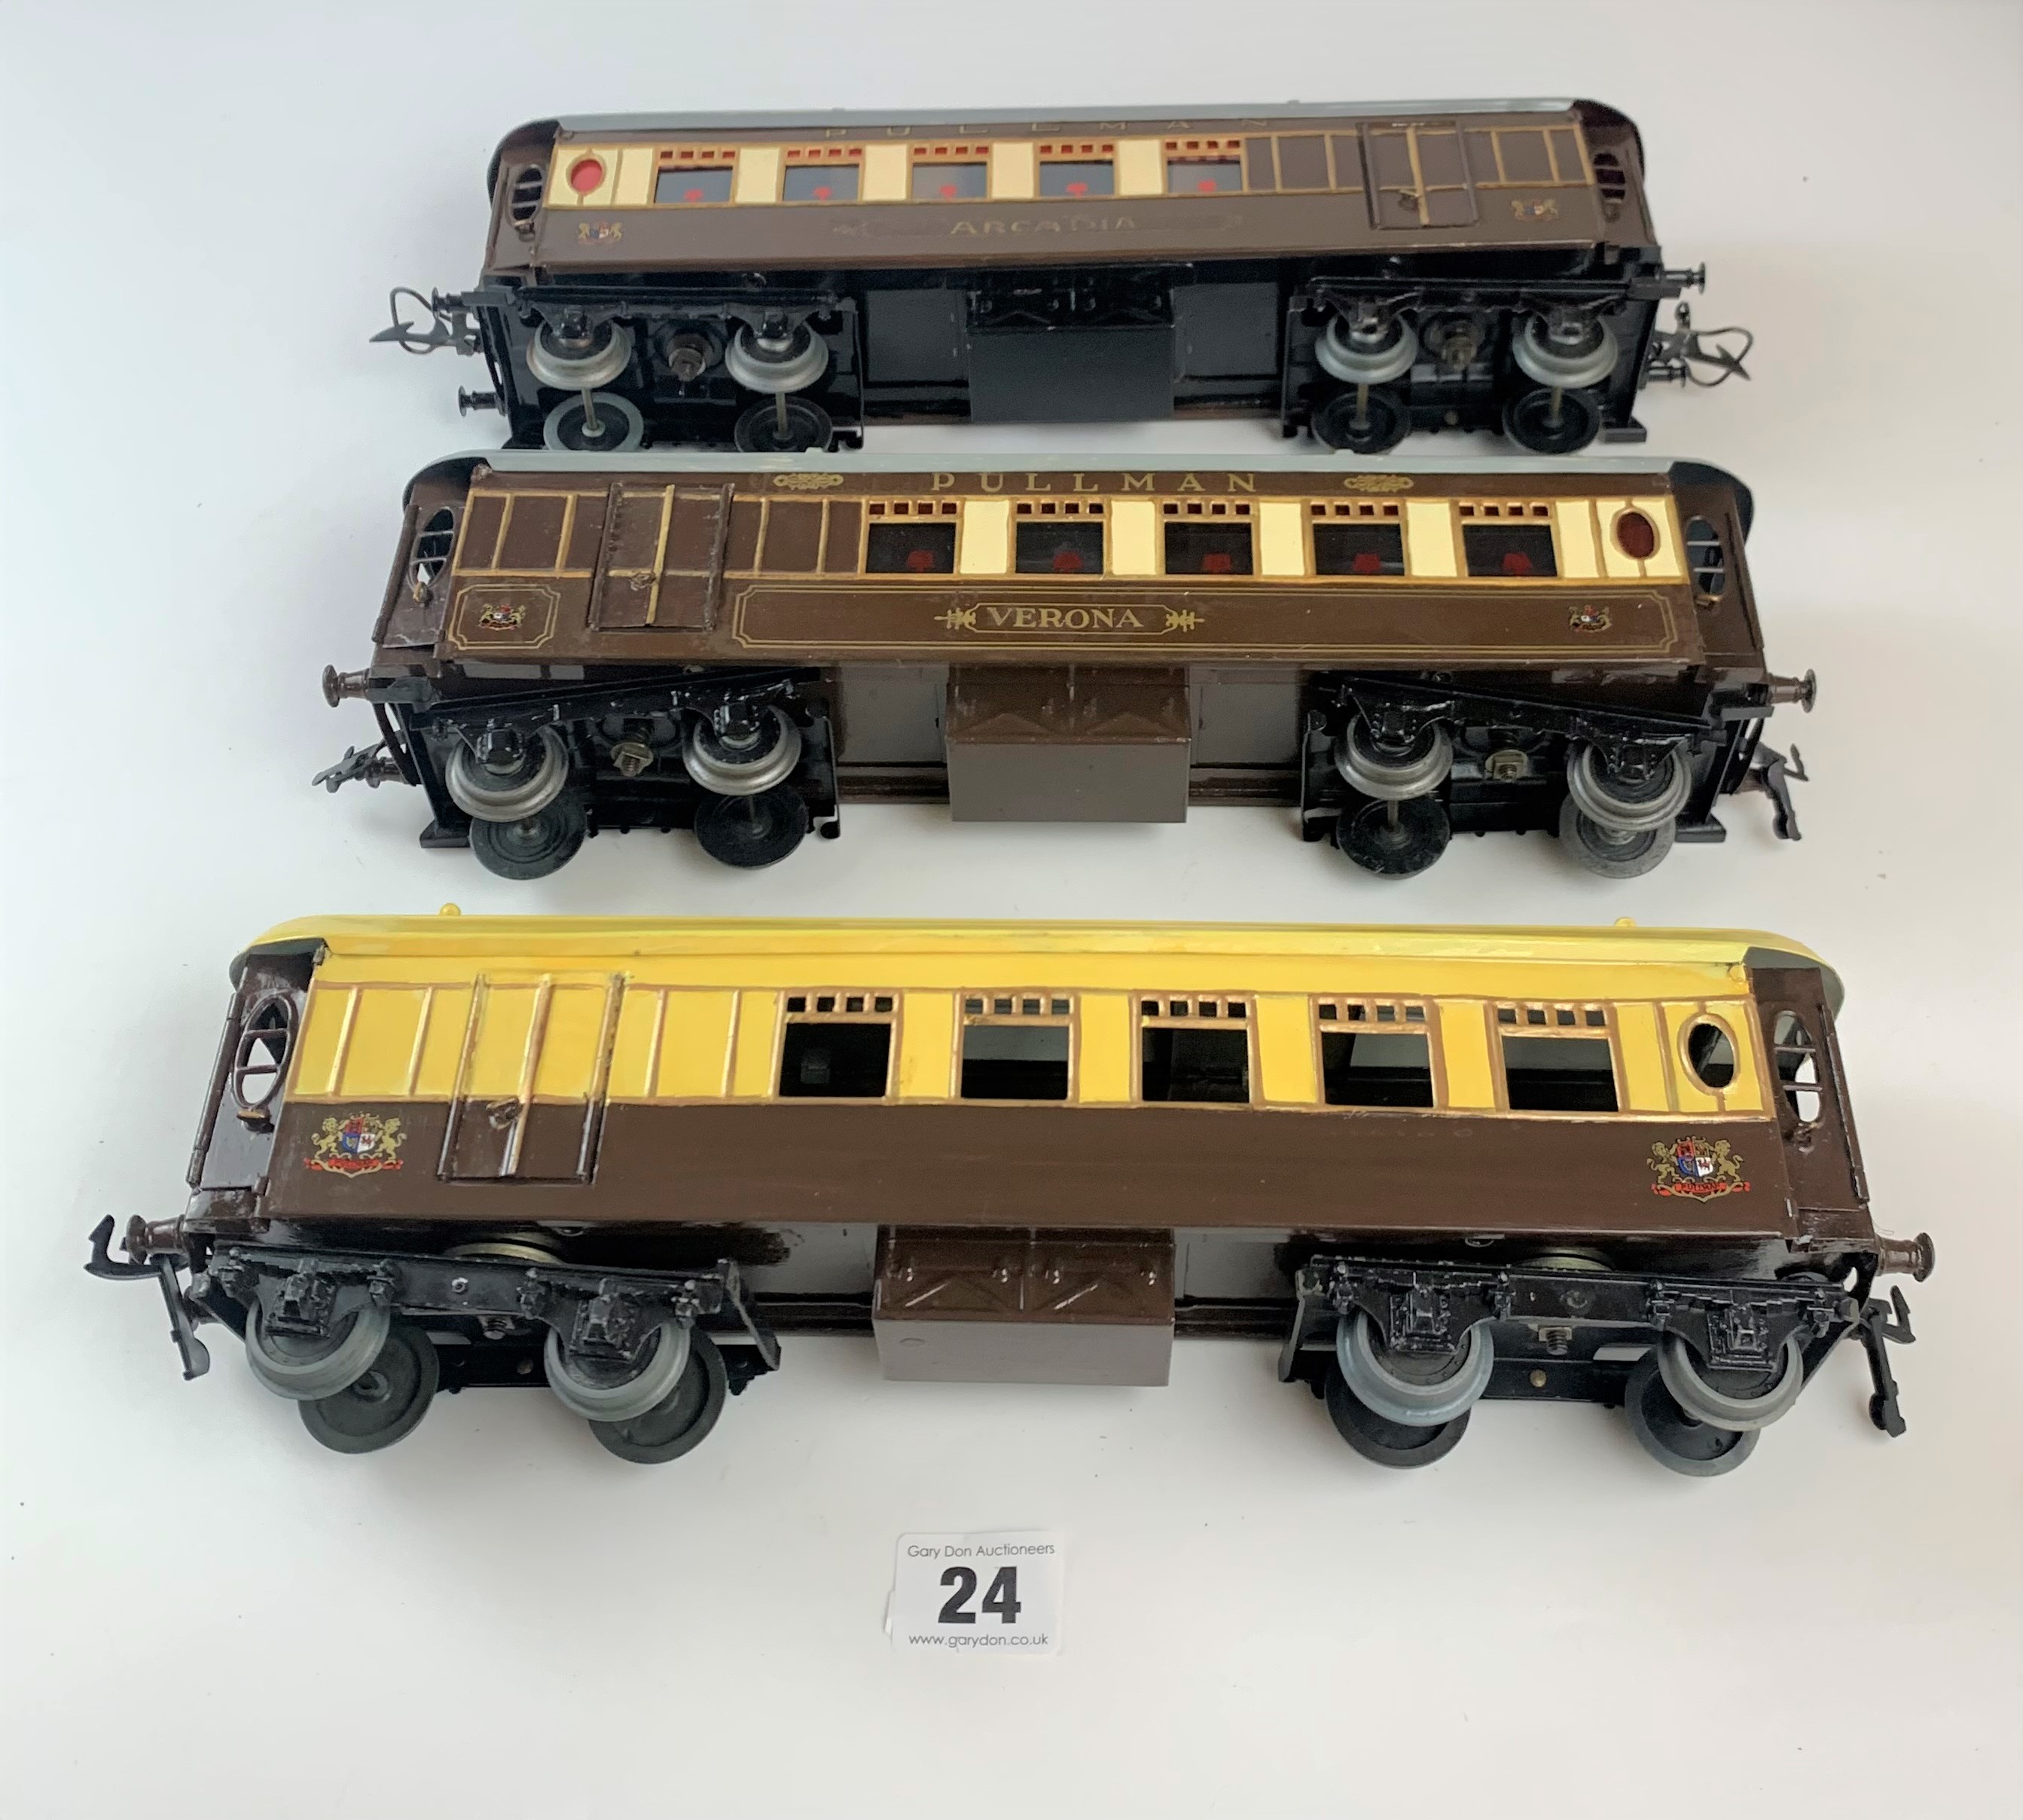 3 x Hornby ‘O’ gauge 8w saloon coaches – Arcadia, Verona and pre-1930’s, restored 1960 - Image 3 of 6